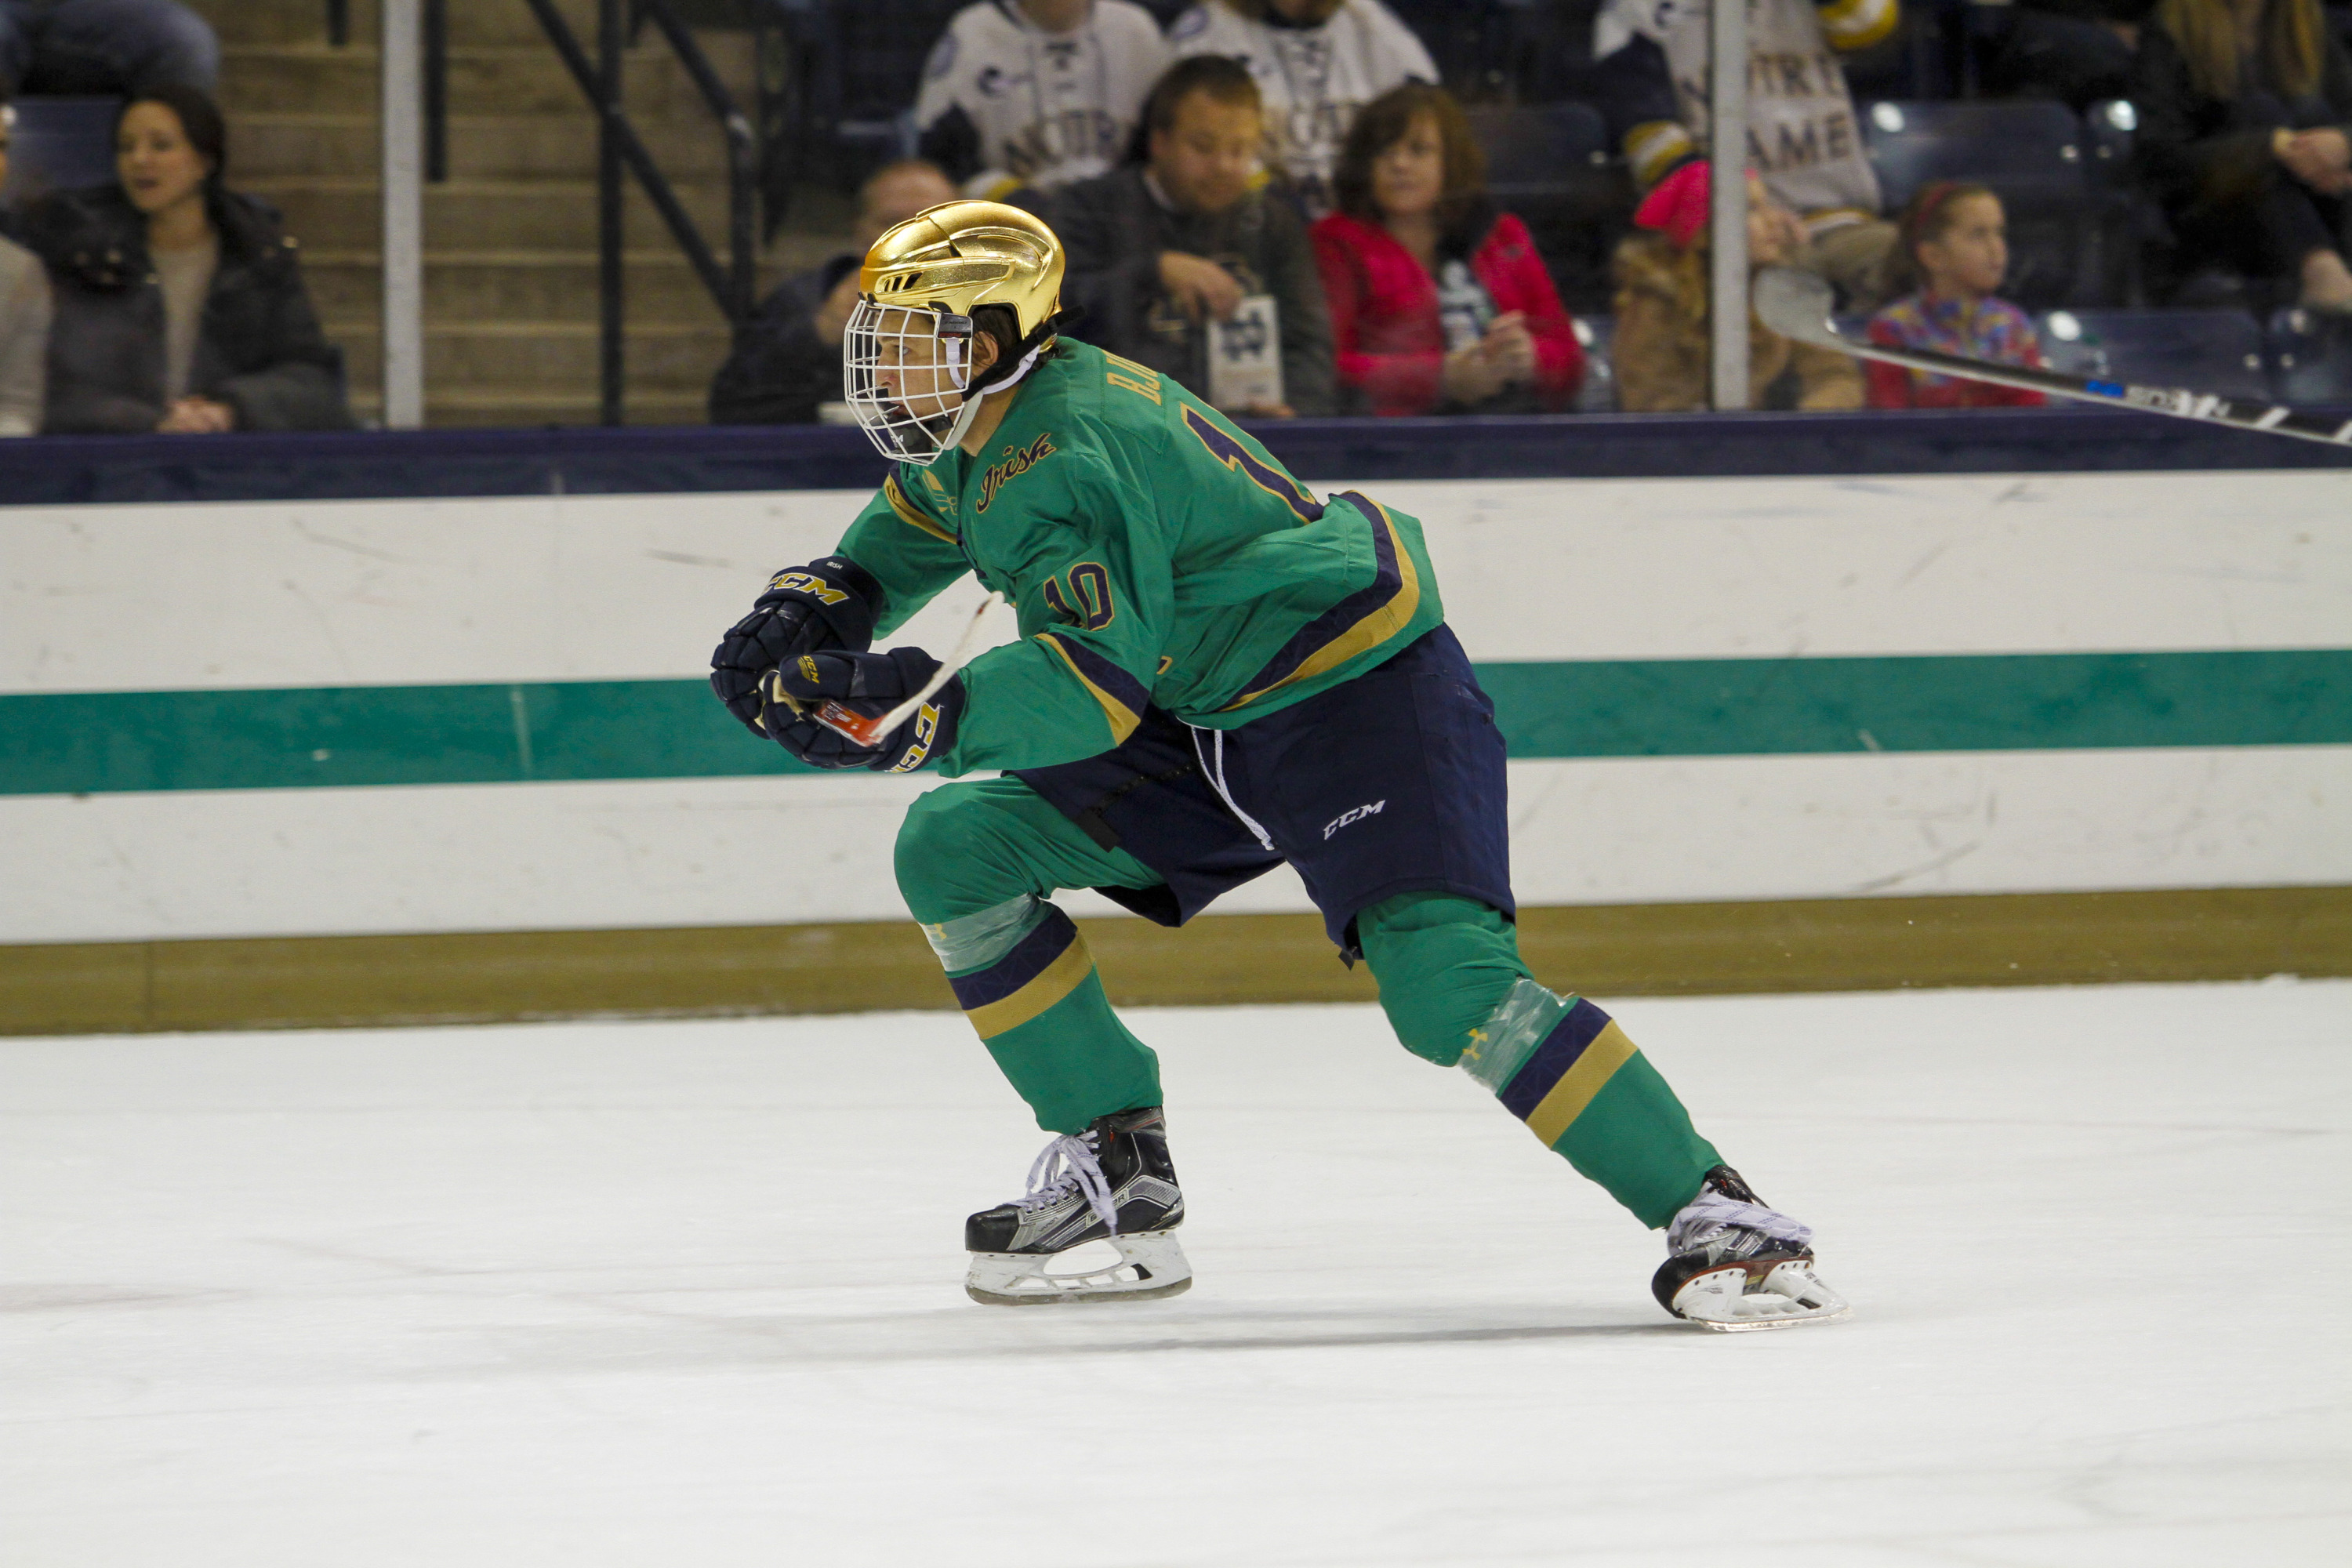 notre dame green jersey